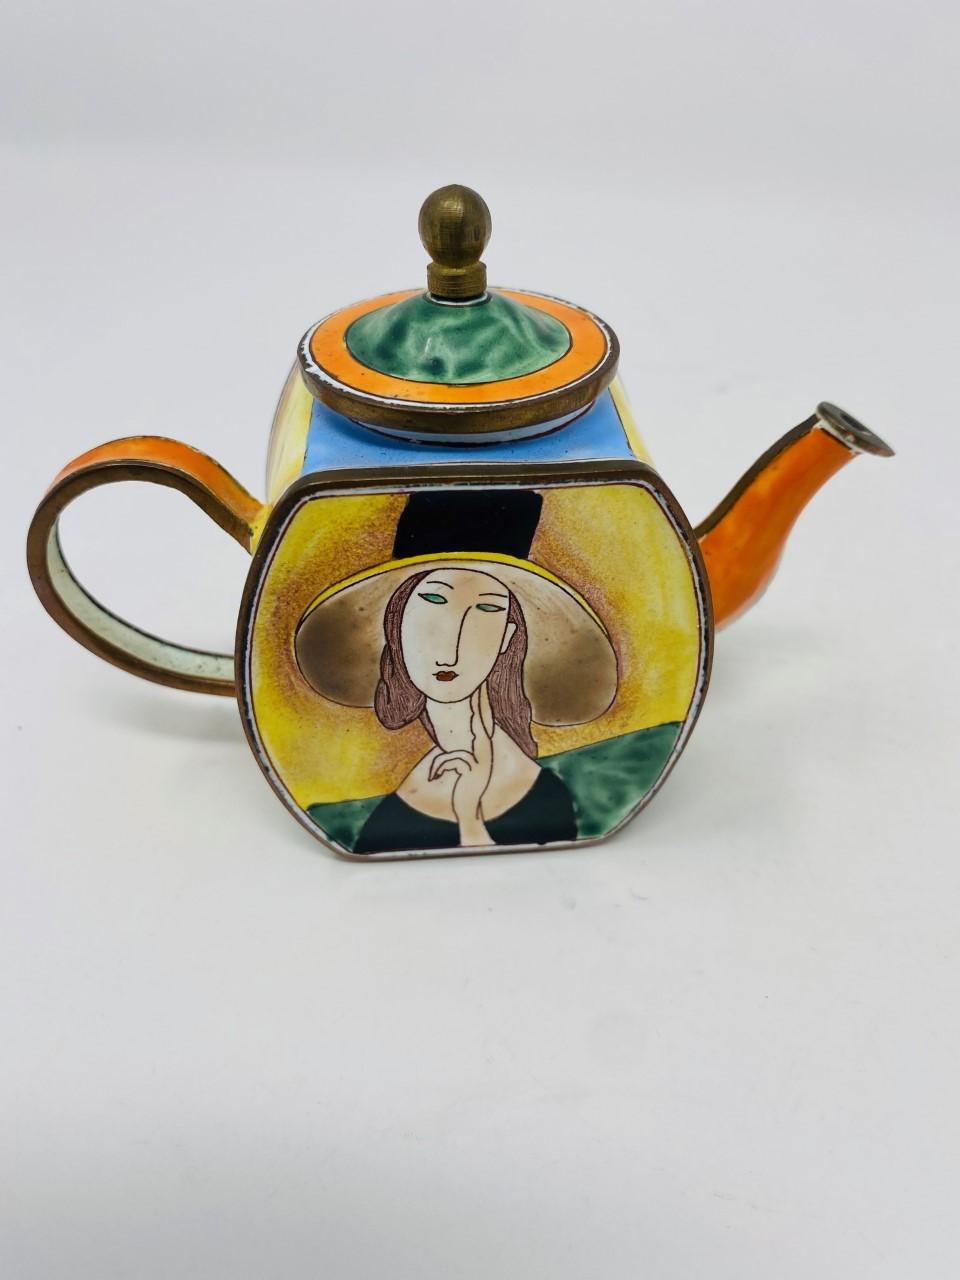 Contemporary Miniature Enameled Tea Pot Hand Painted Modigliani Lady with Hat by Kelvin Chen